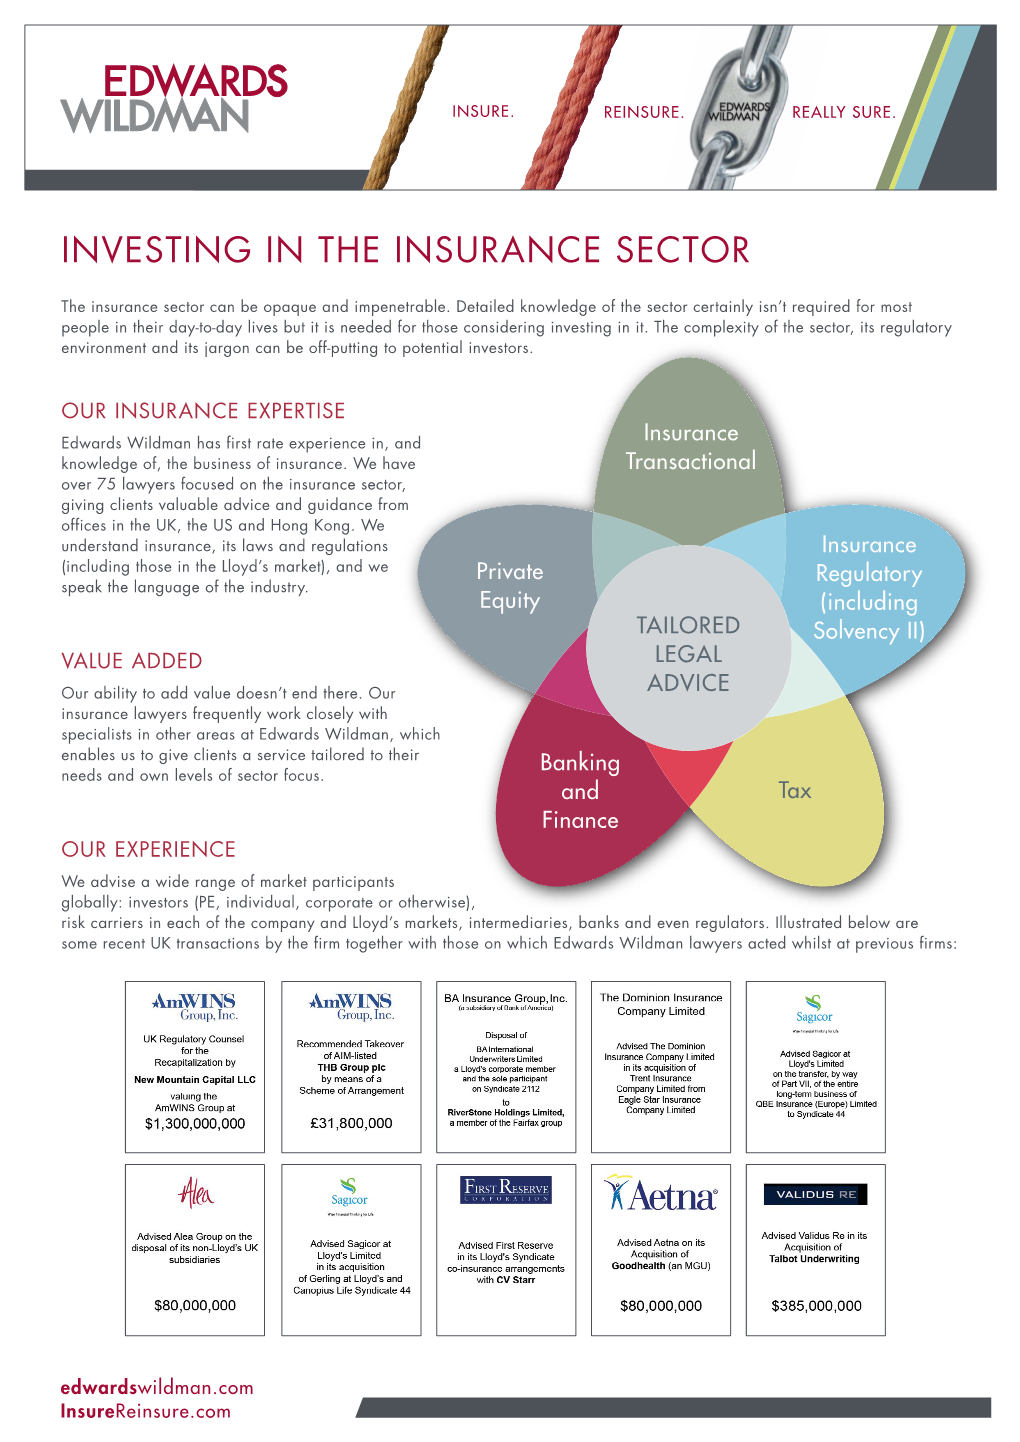 Investing in the Insurance Sector